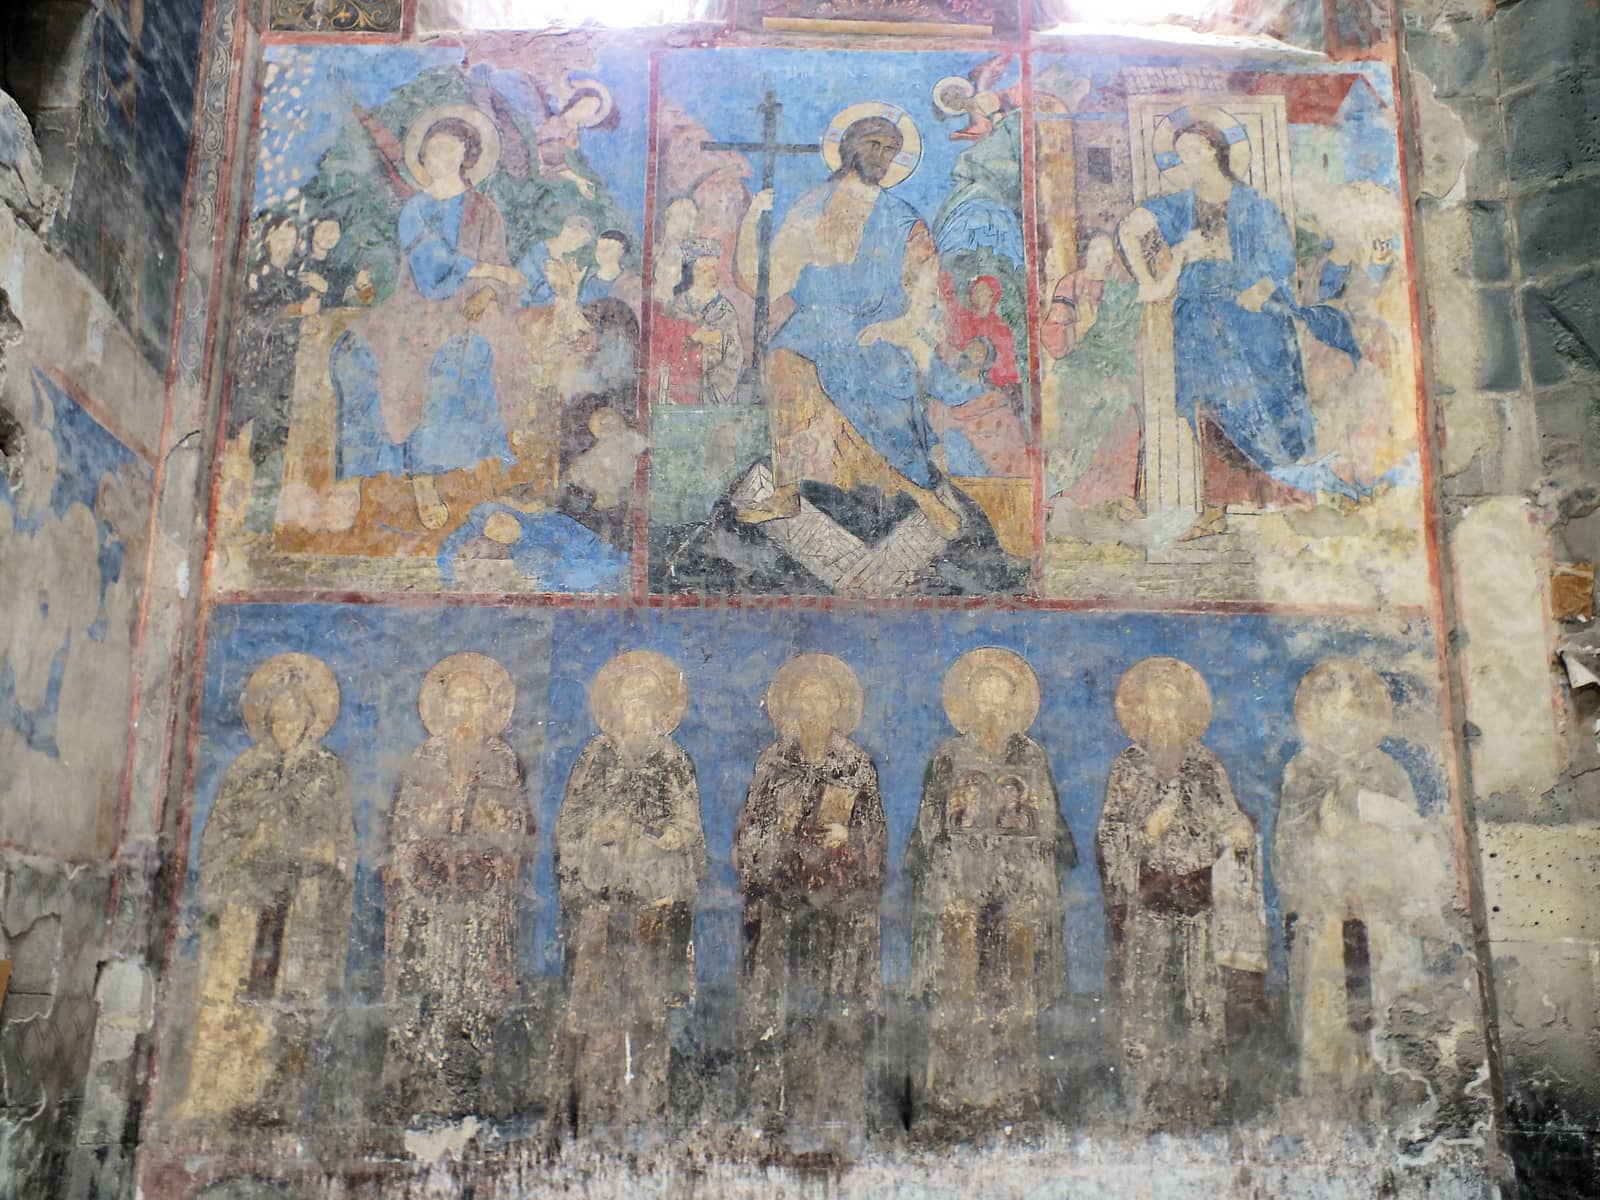 A close up of the frescoes painted under the patronage of atabek Ivane Zakarian between 1205 and 1216 in the Surp Astvatsatsin (Holy Mother of God) church at Akhtala Monsatery